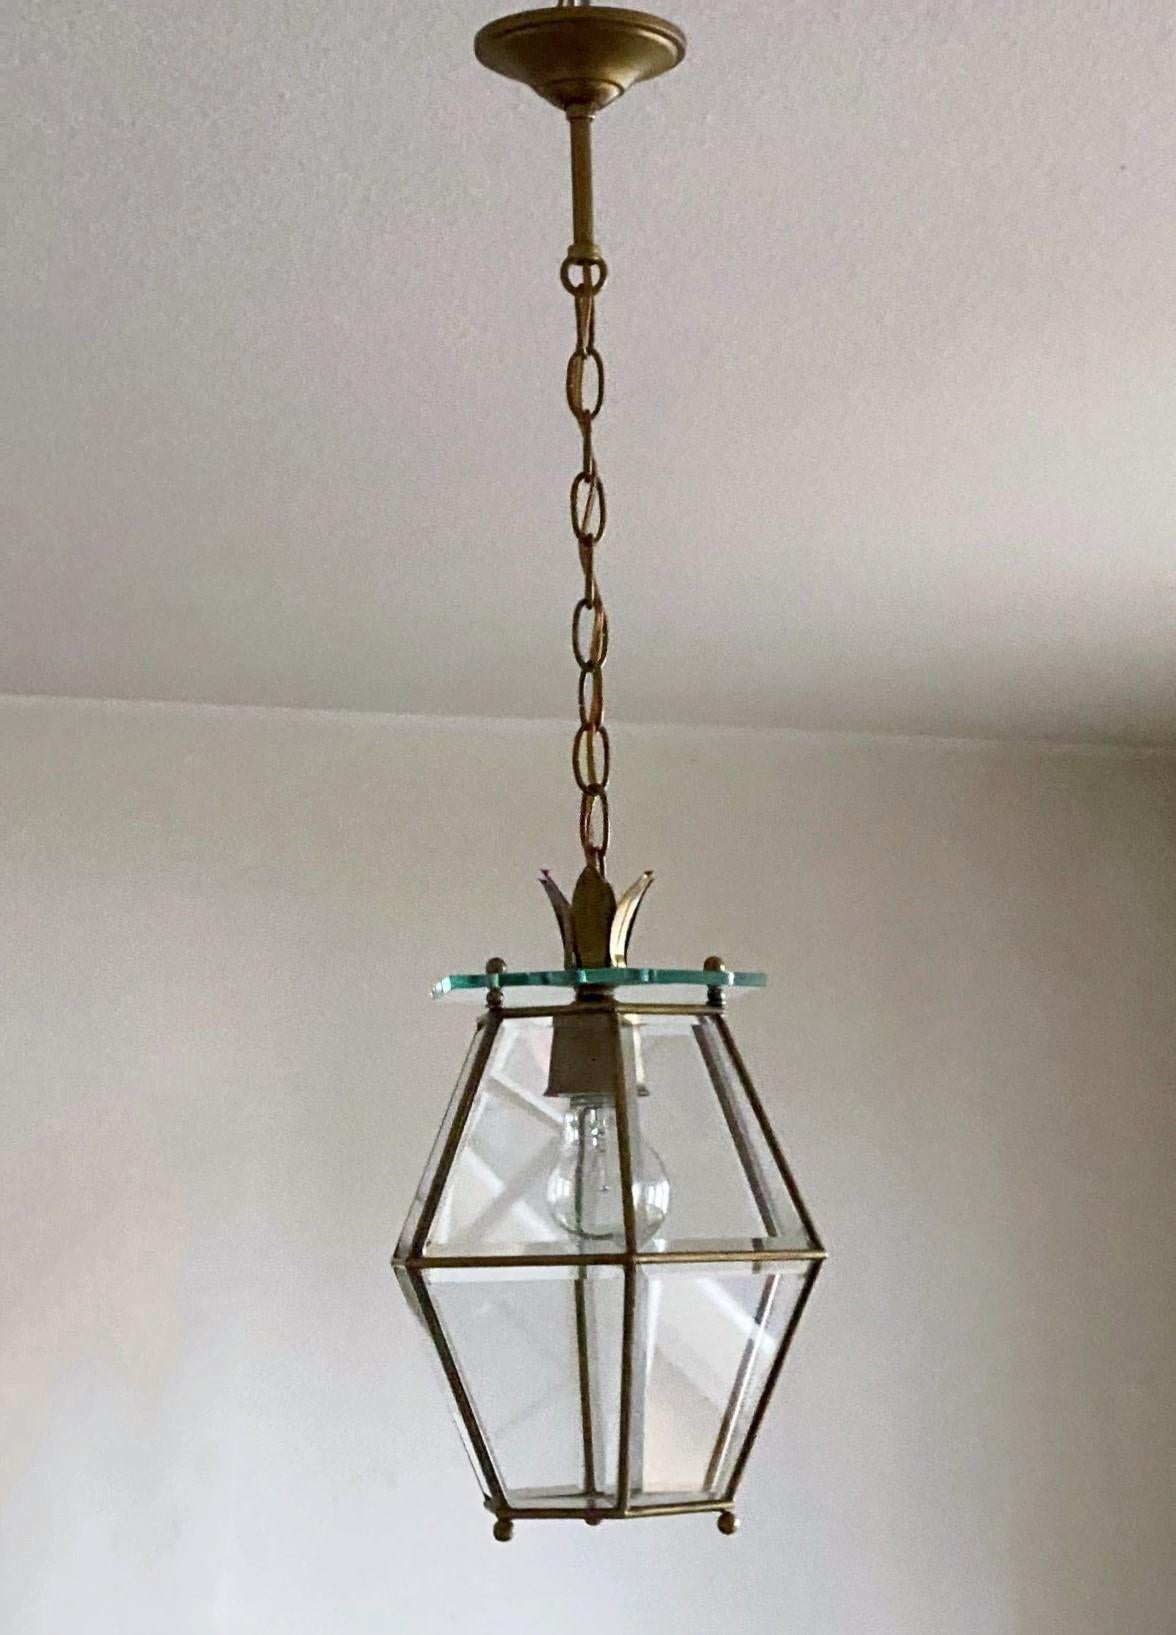 Art Deco Midcentury Fontana Arte Style Faceted Glass Brass Lantern, Italy, 1950s For Sale